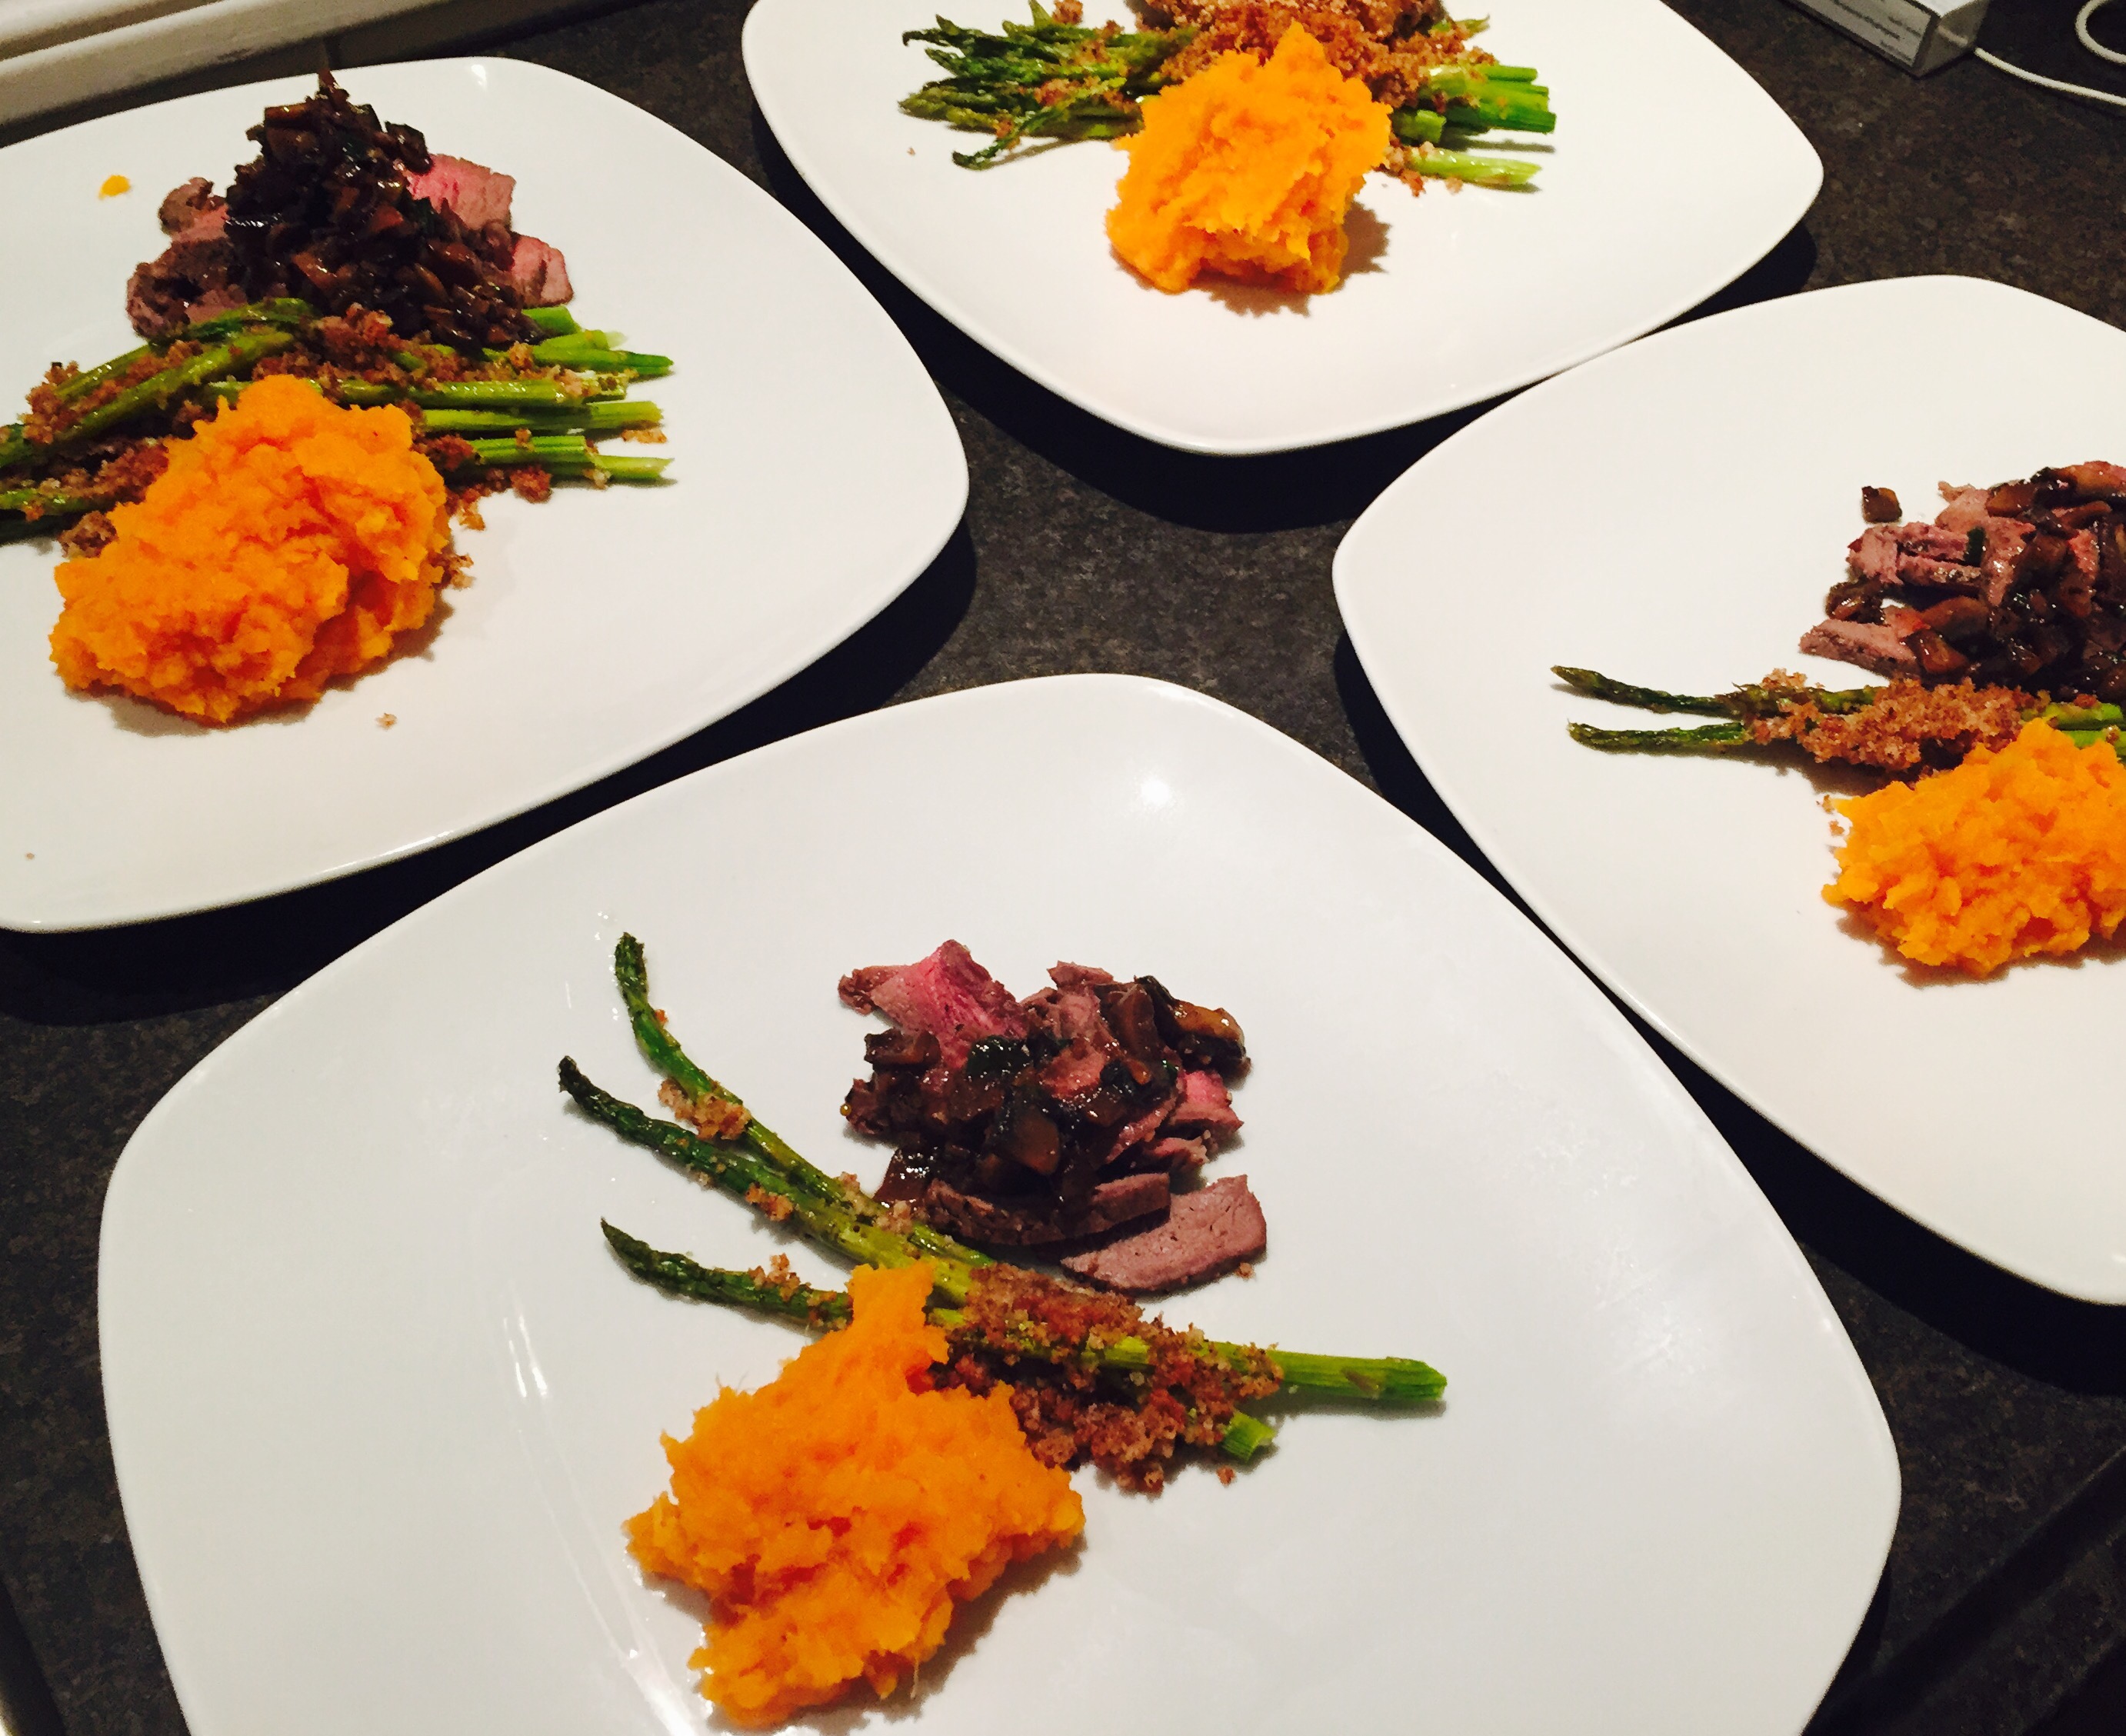 Broiled sirloin with baked asparagus and mashed sweet potatoes